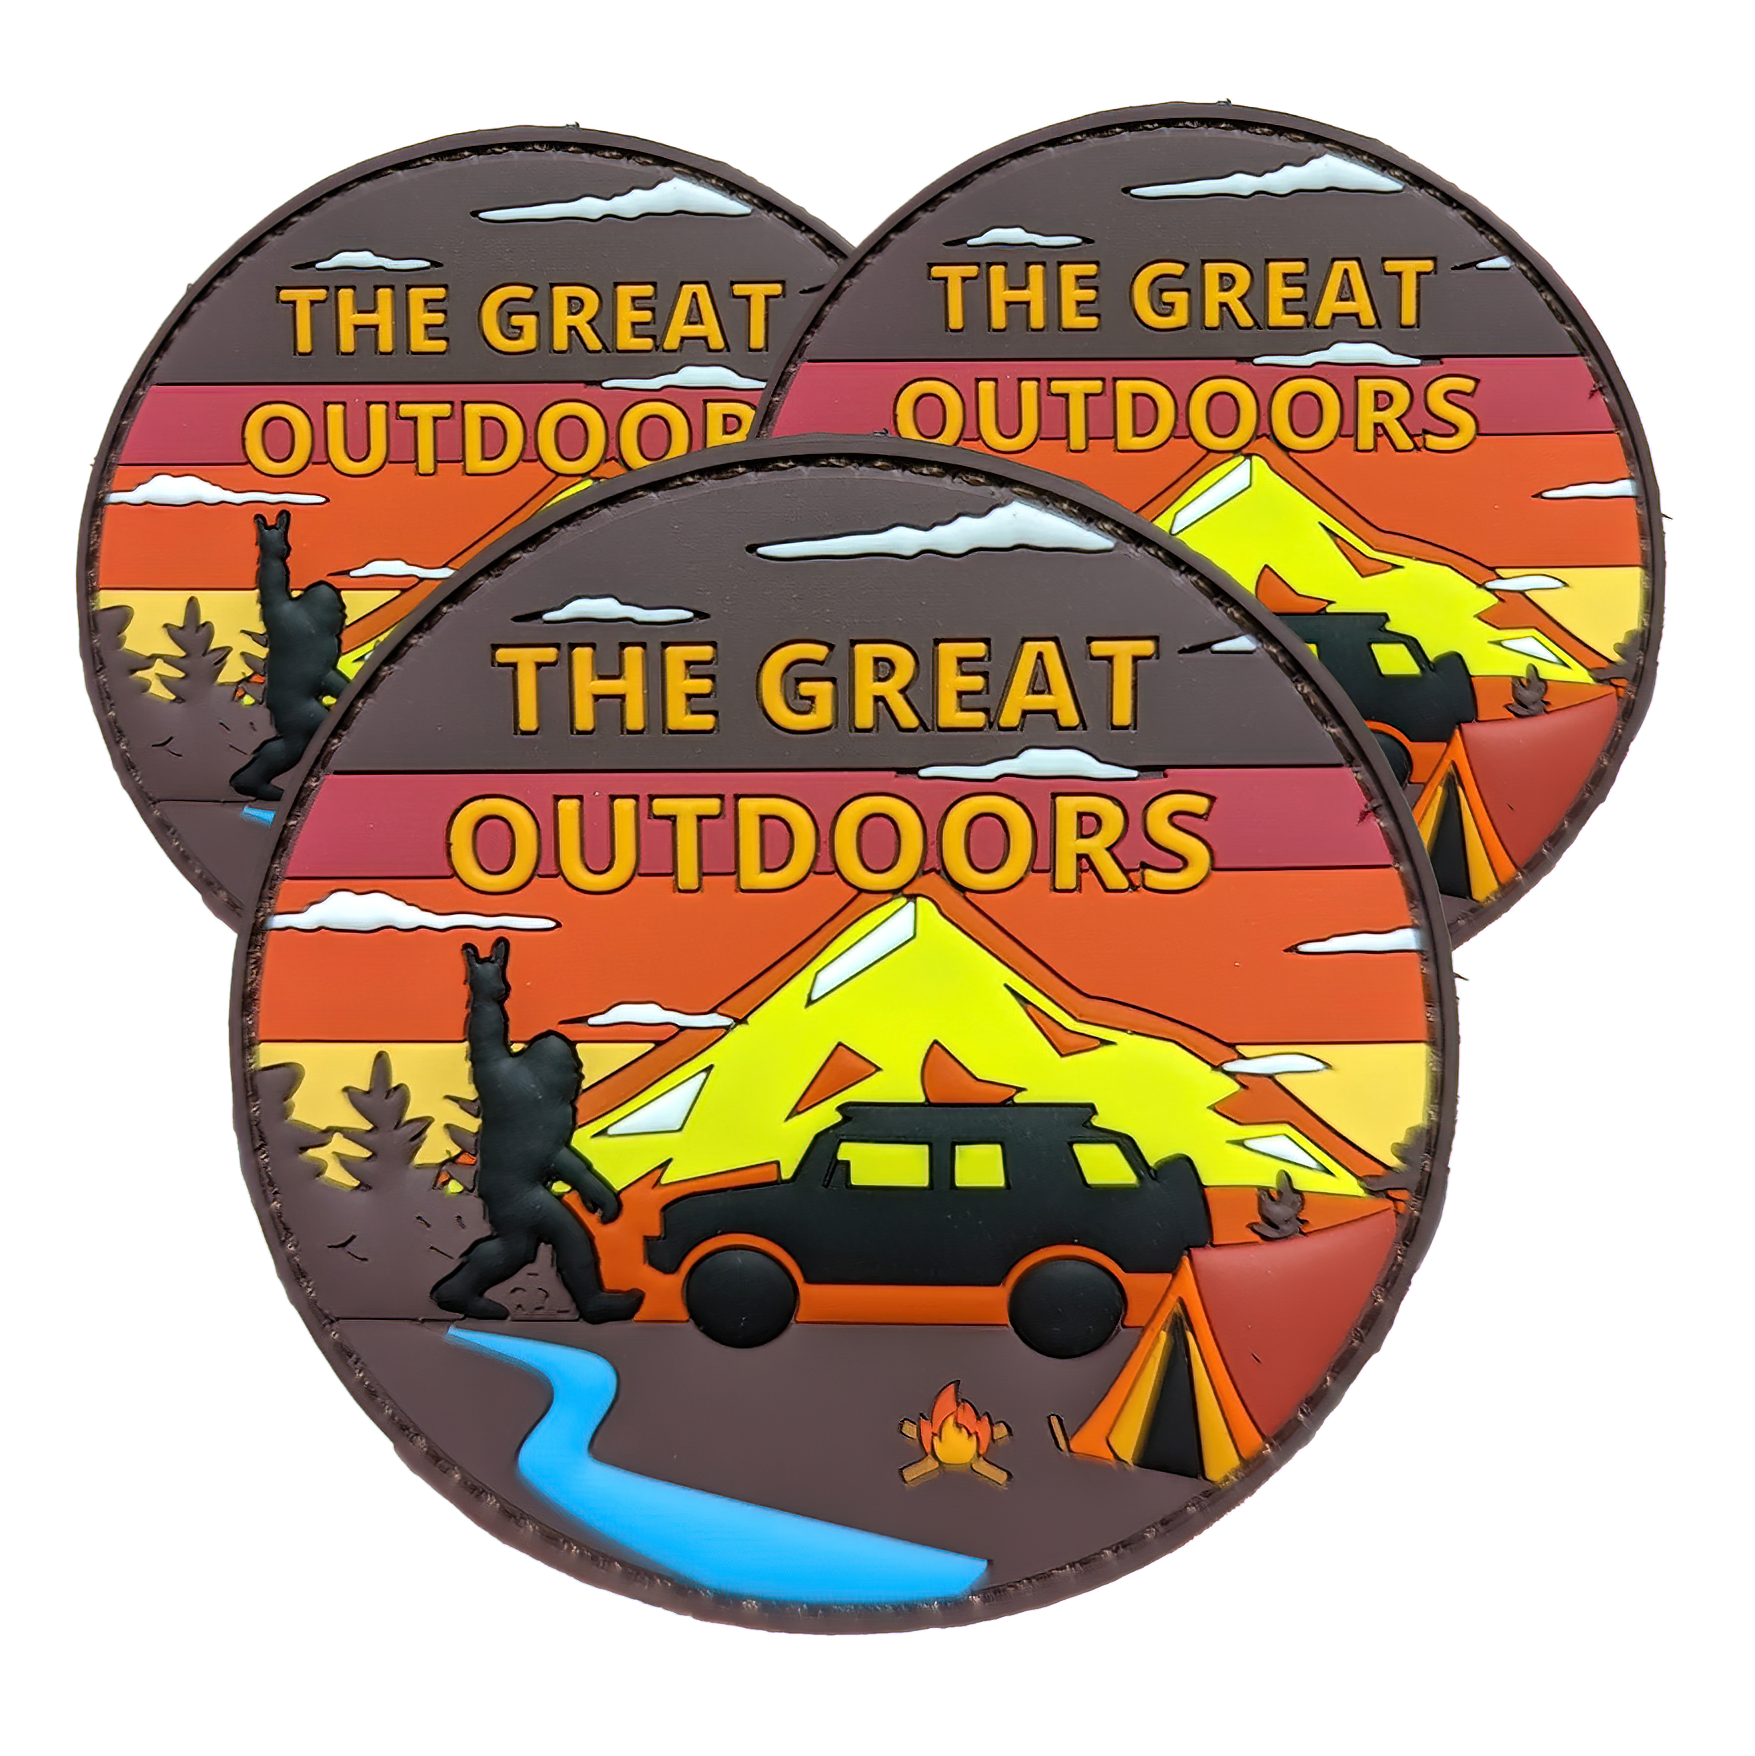 High Quality Morale patch, great for outdoors, camping, automotive vehicle accessory to put on your glass or window. UV resistant, these patches are popular on the Toyota Patch Club TPC on Facebook. People put them on their headliner.